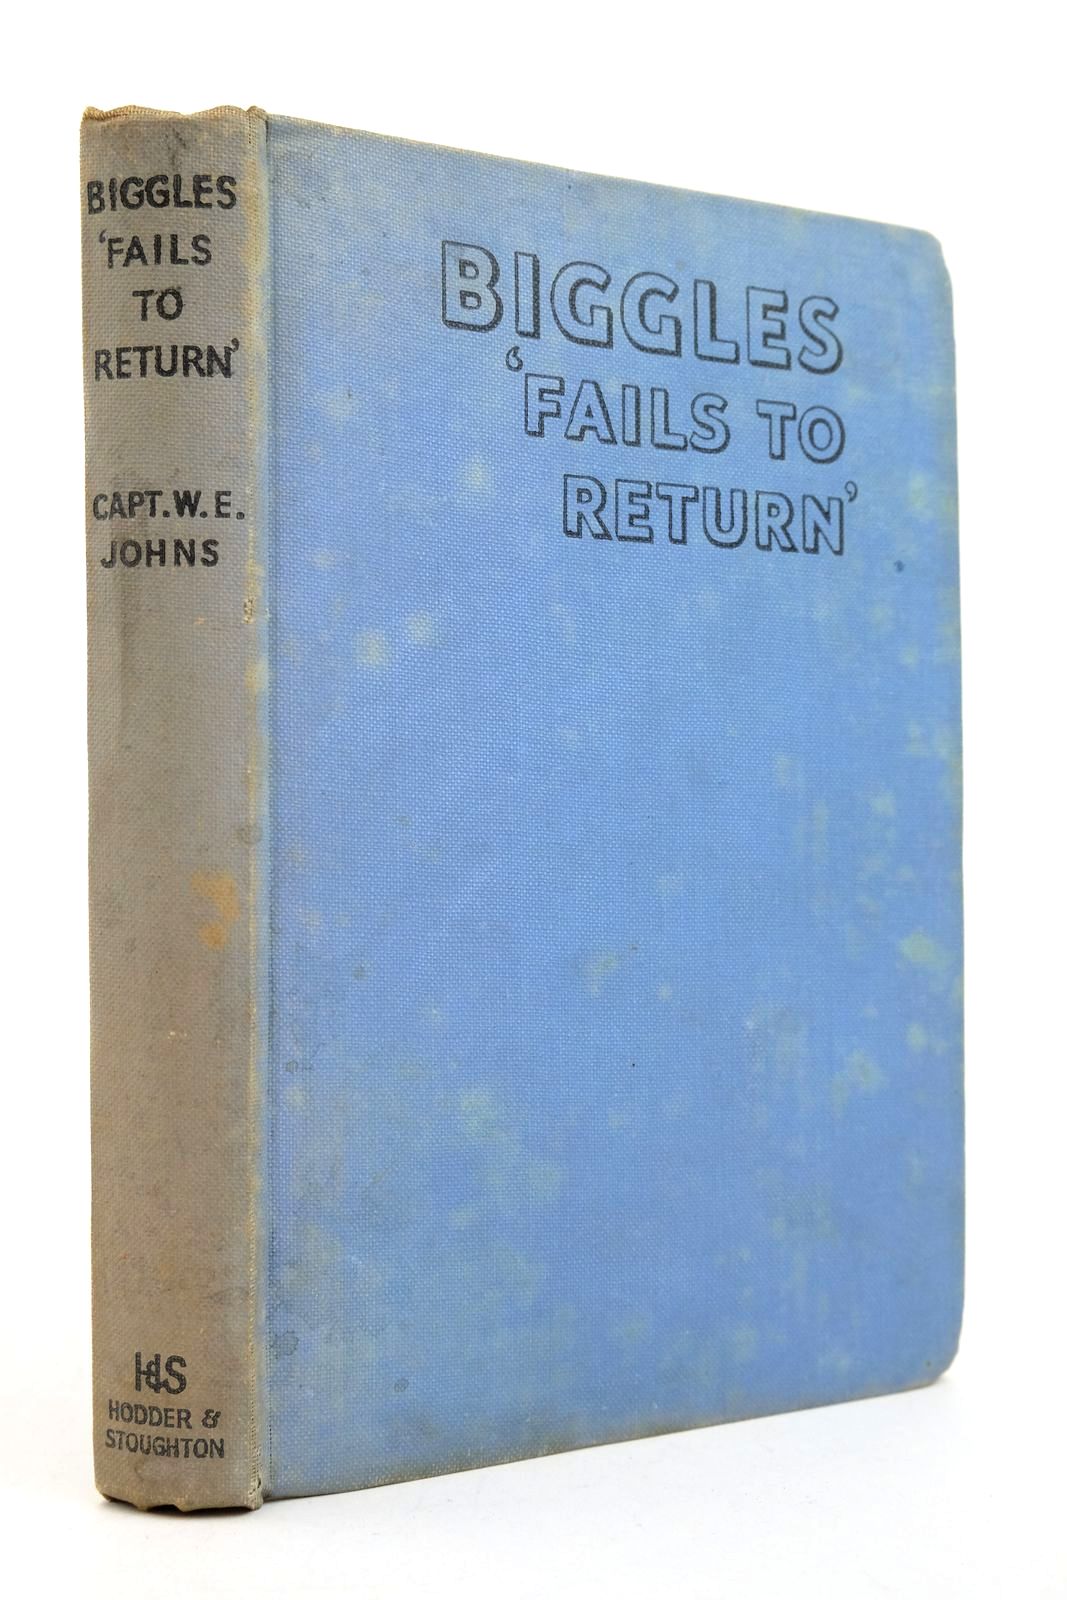 Photo of BIGGLES FAILS TO RETURN written by Johns, W.E. illustrated by Stead,  published by Hodder & Stoughton (STOCK CODE: 2139774)  for sale by Stella & Rose's Books